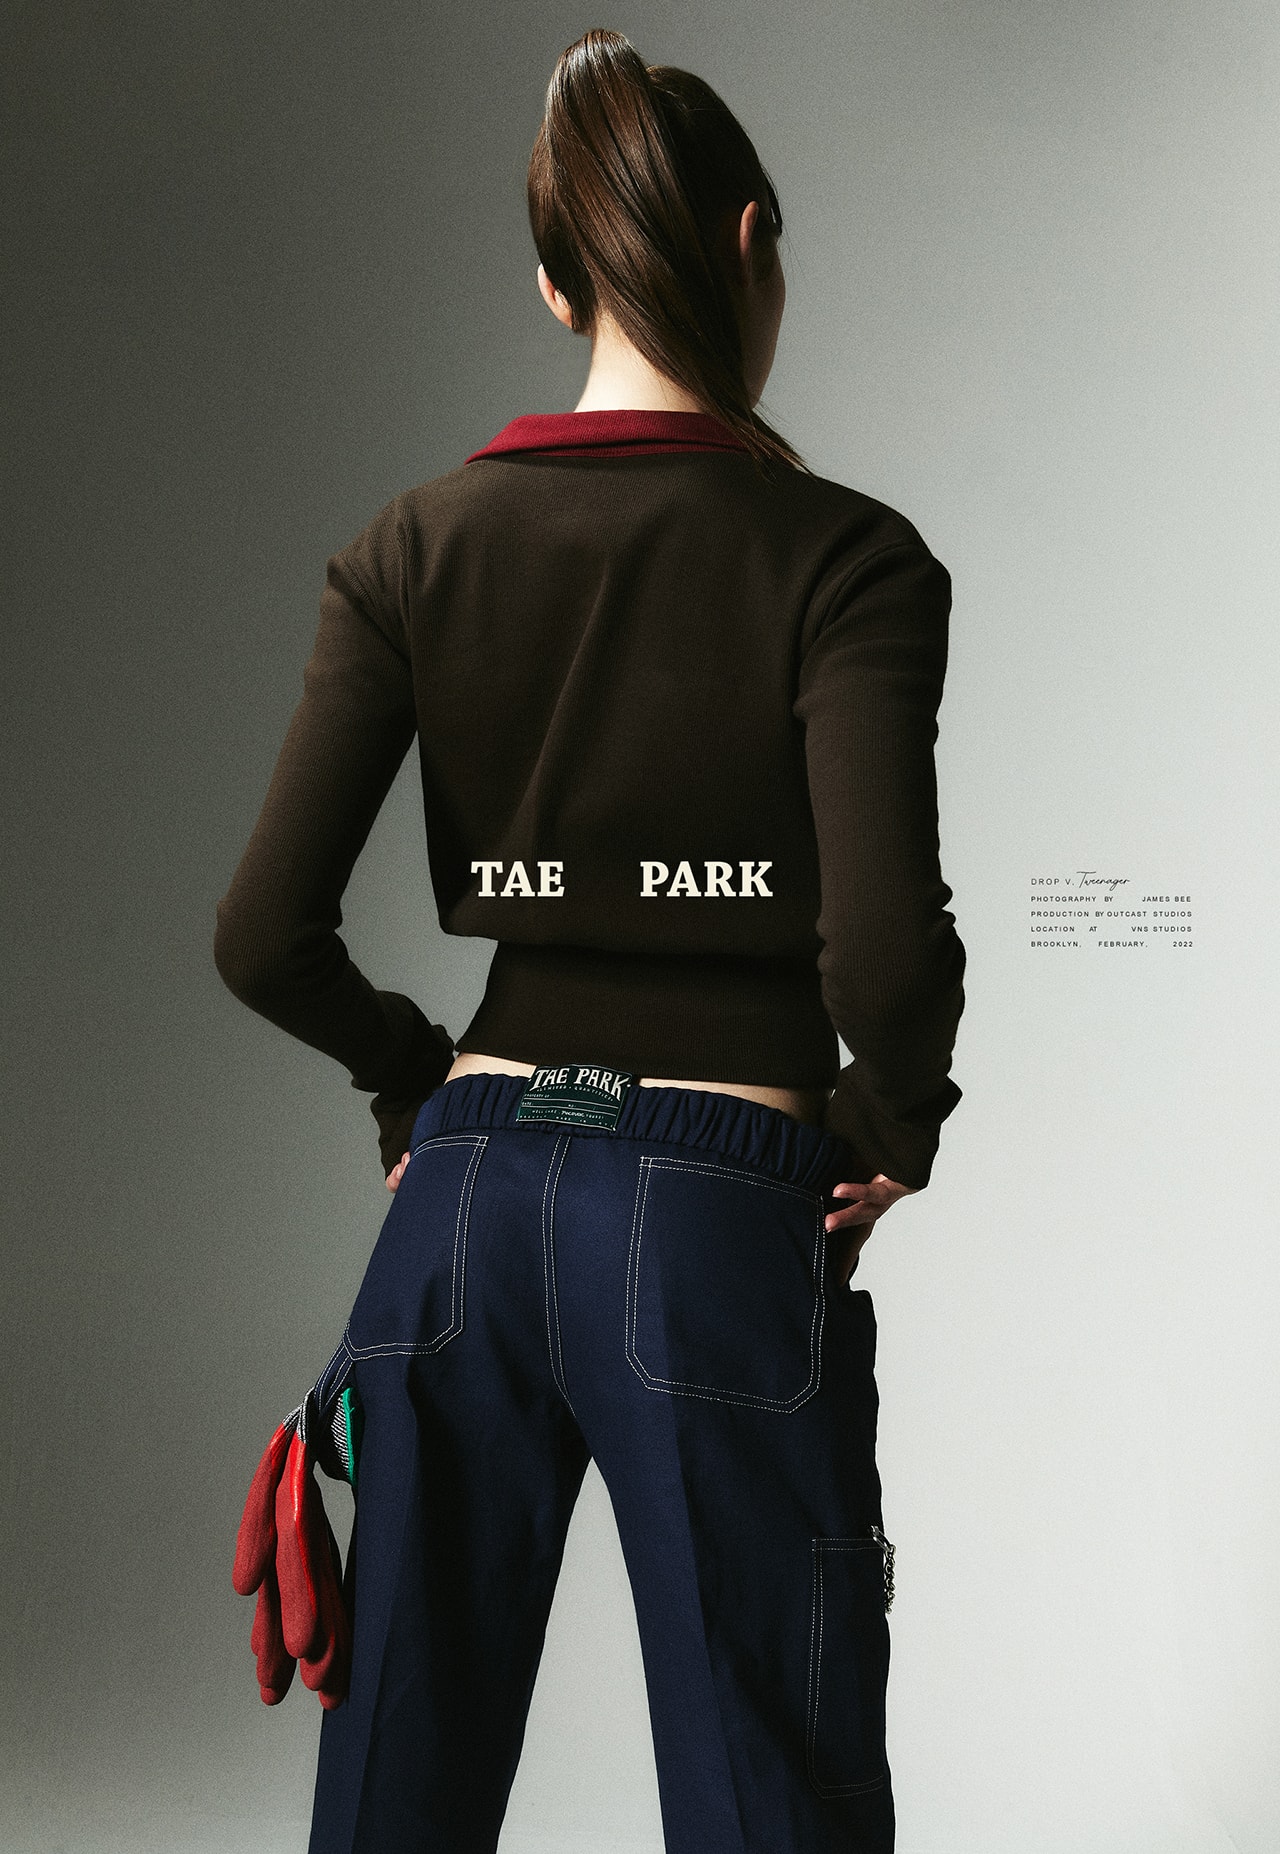 Tae Park New York City Brooklyn Fashion Womenswear Brand Drop V Campaign Lookbook Painter Pants Toy Sweater grey red